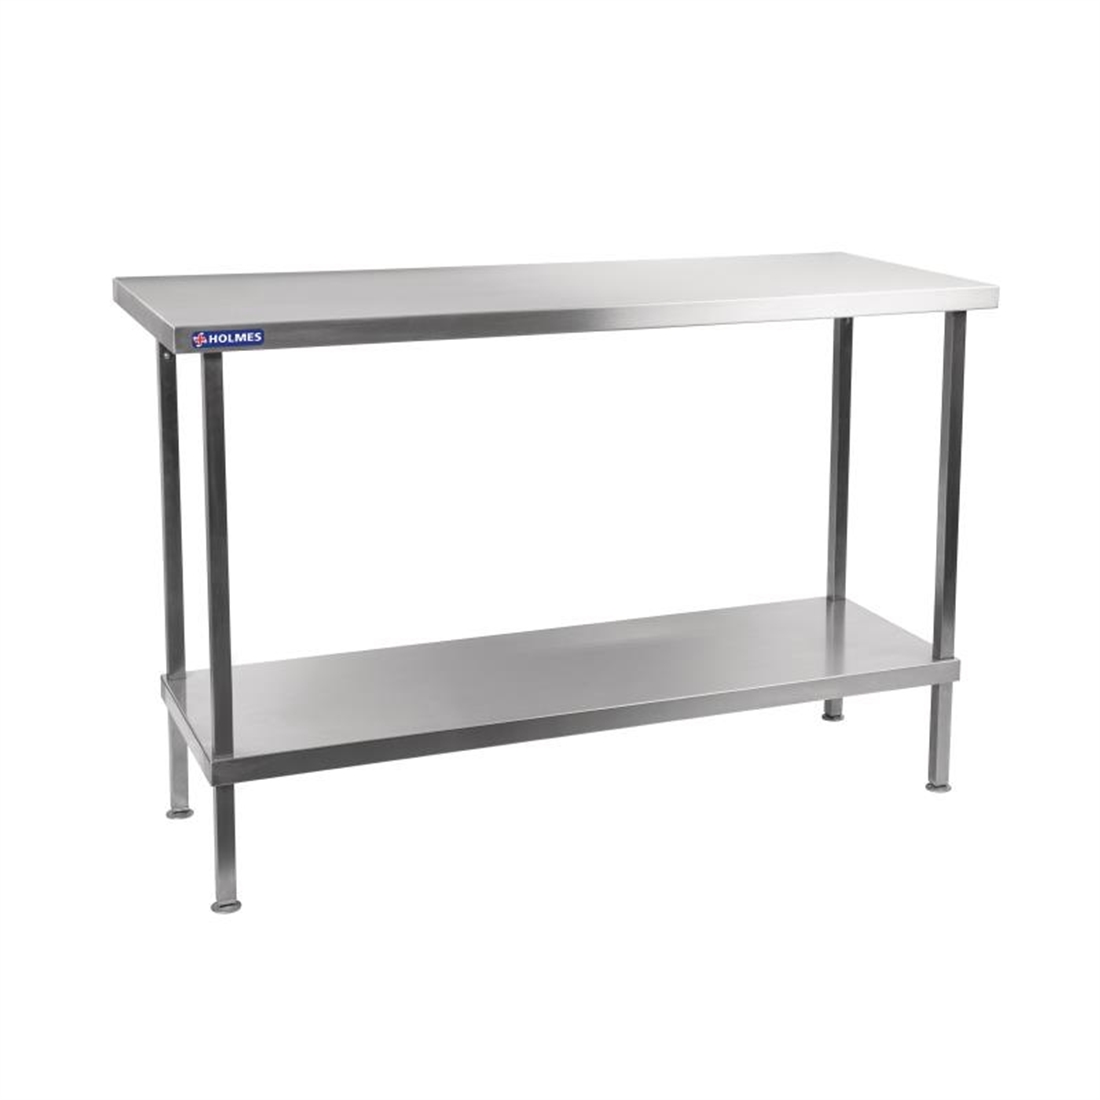 Holmes Stainless Steel Centre Table 900mm